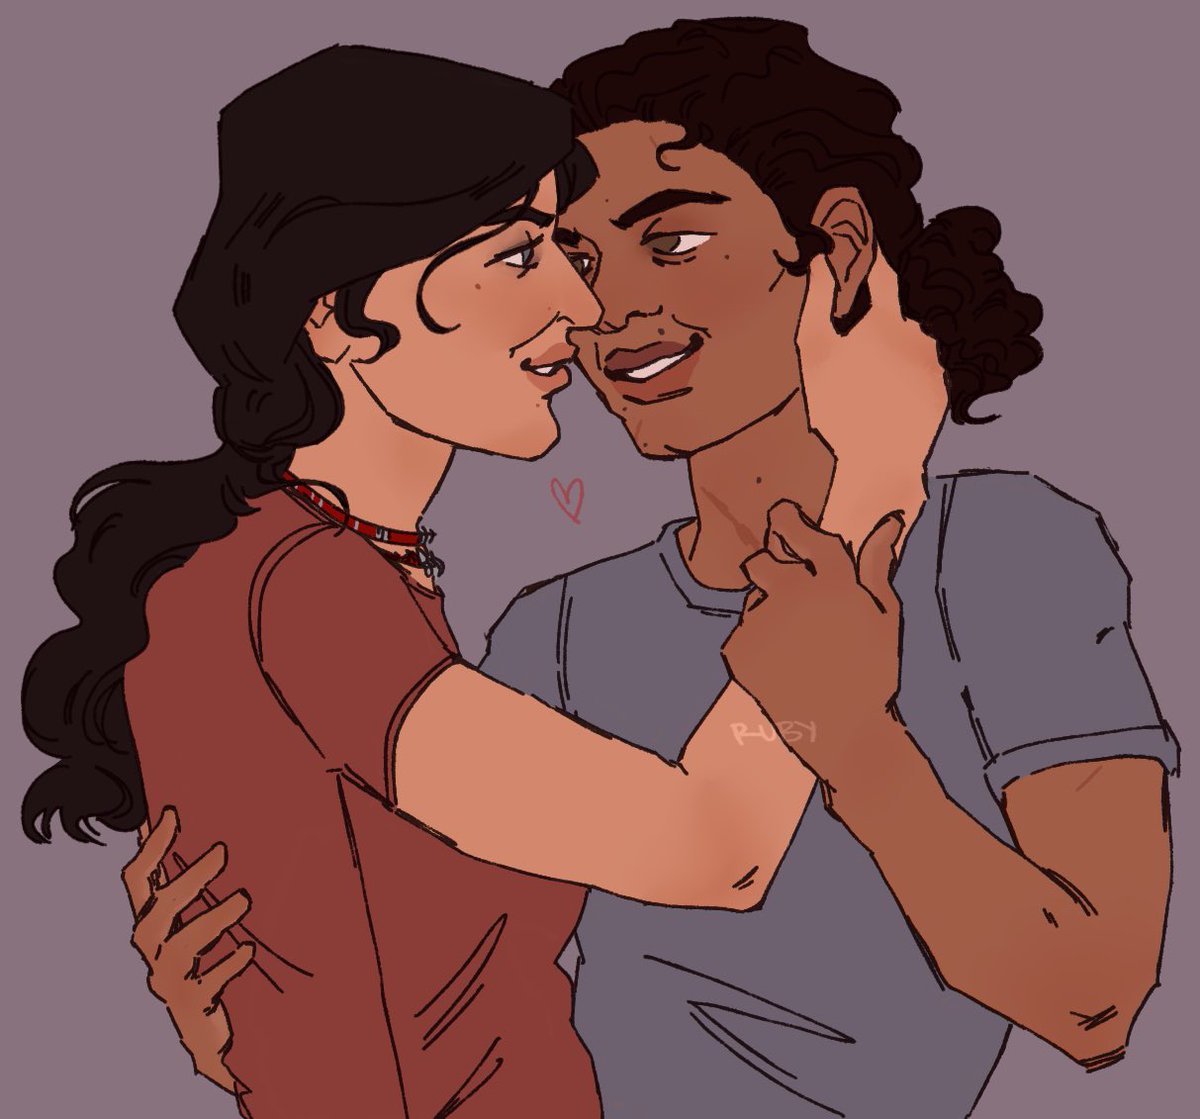 happy early valentine’s day! 
#chlodine #unchartedlostlegacy